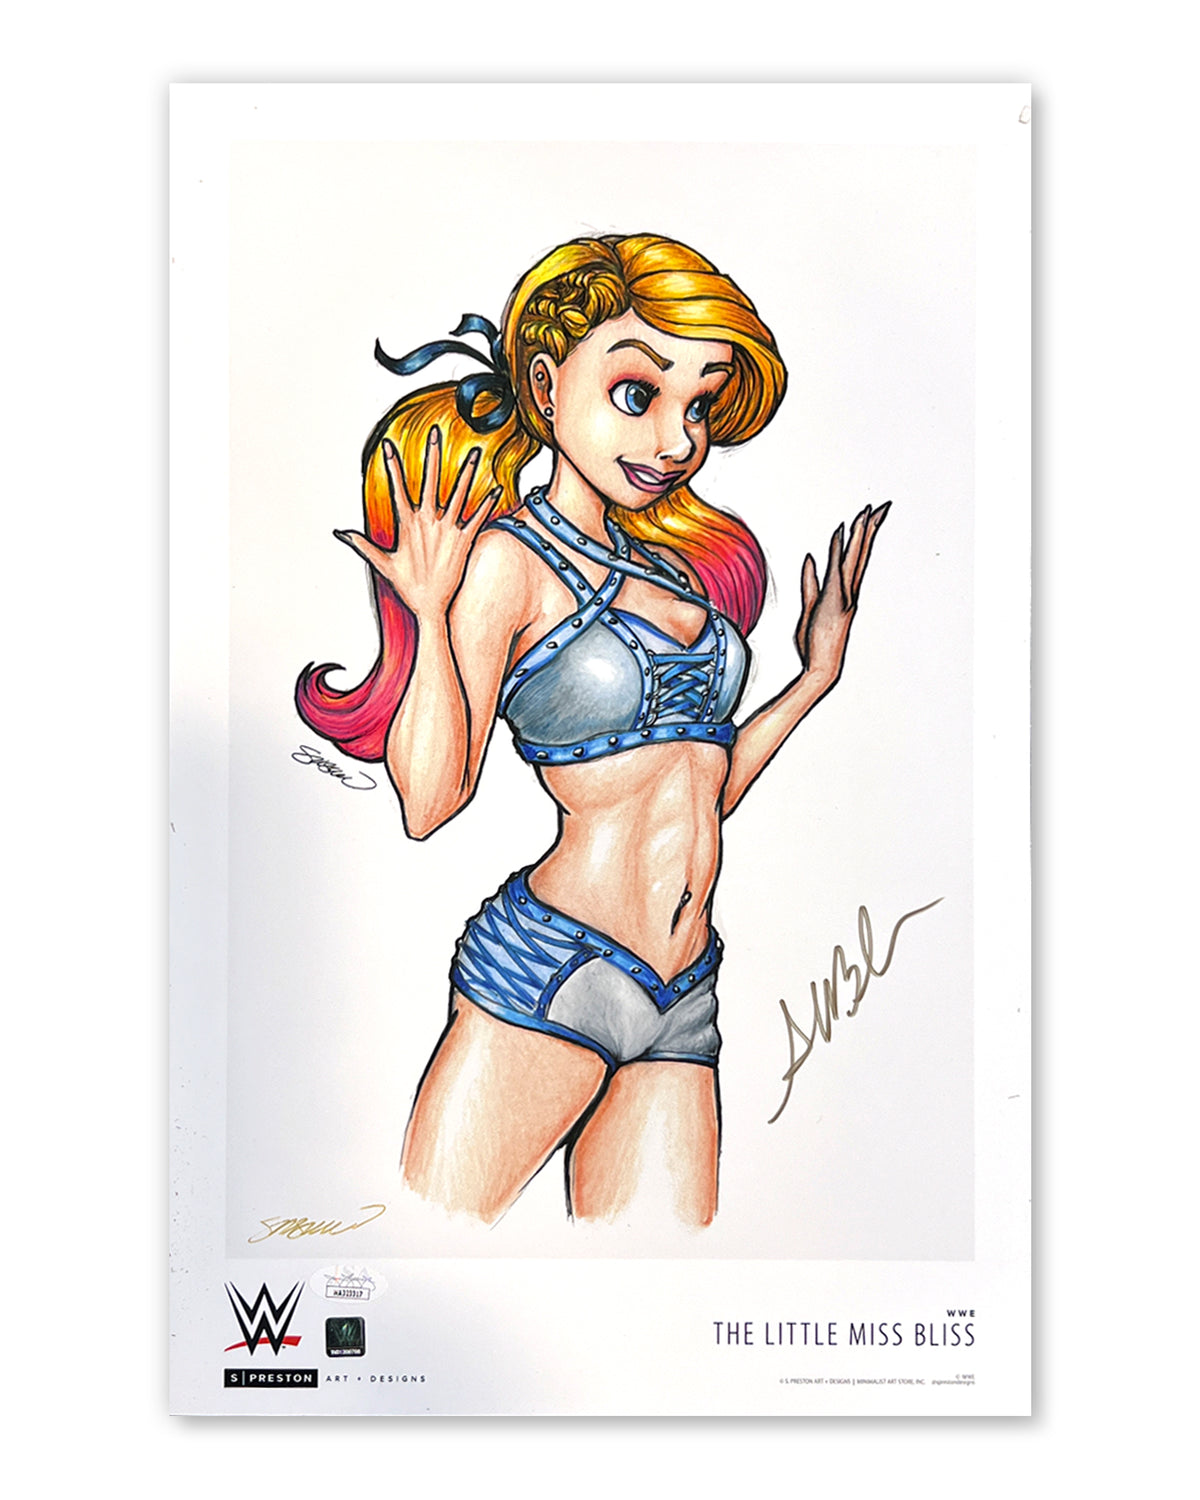 The Little Miss Bliss Print - Alexa Bliss Autographed - Authenticated